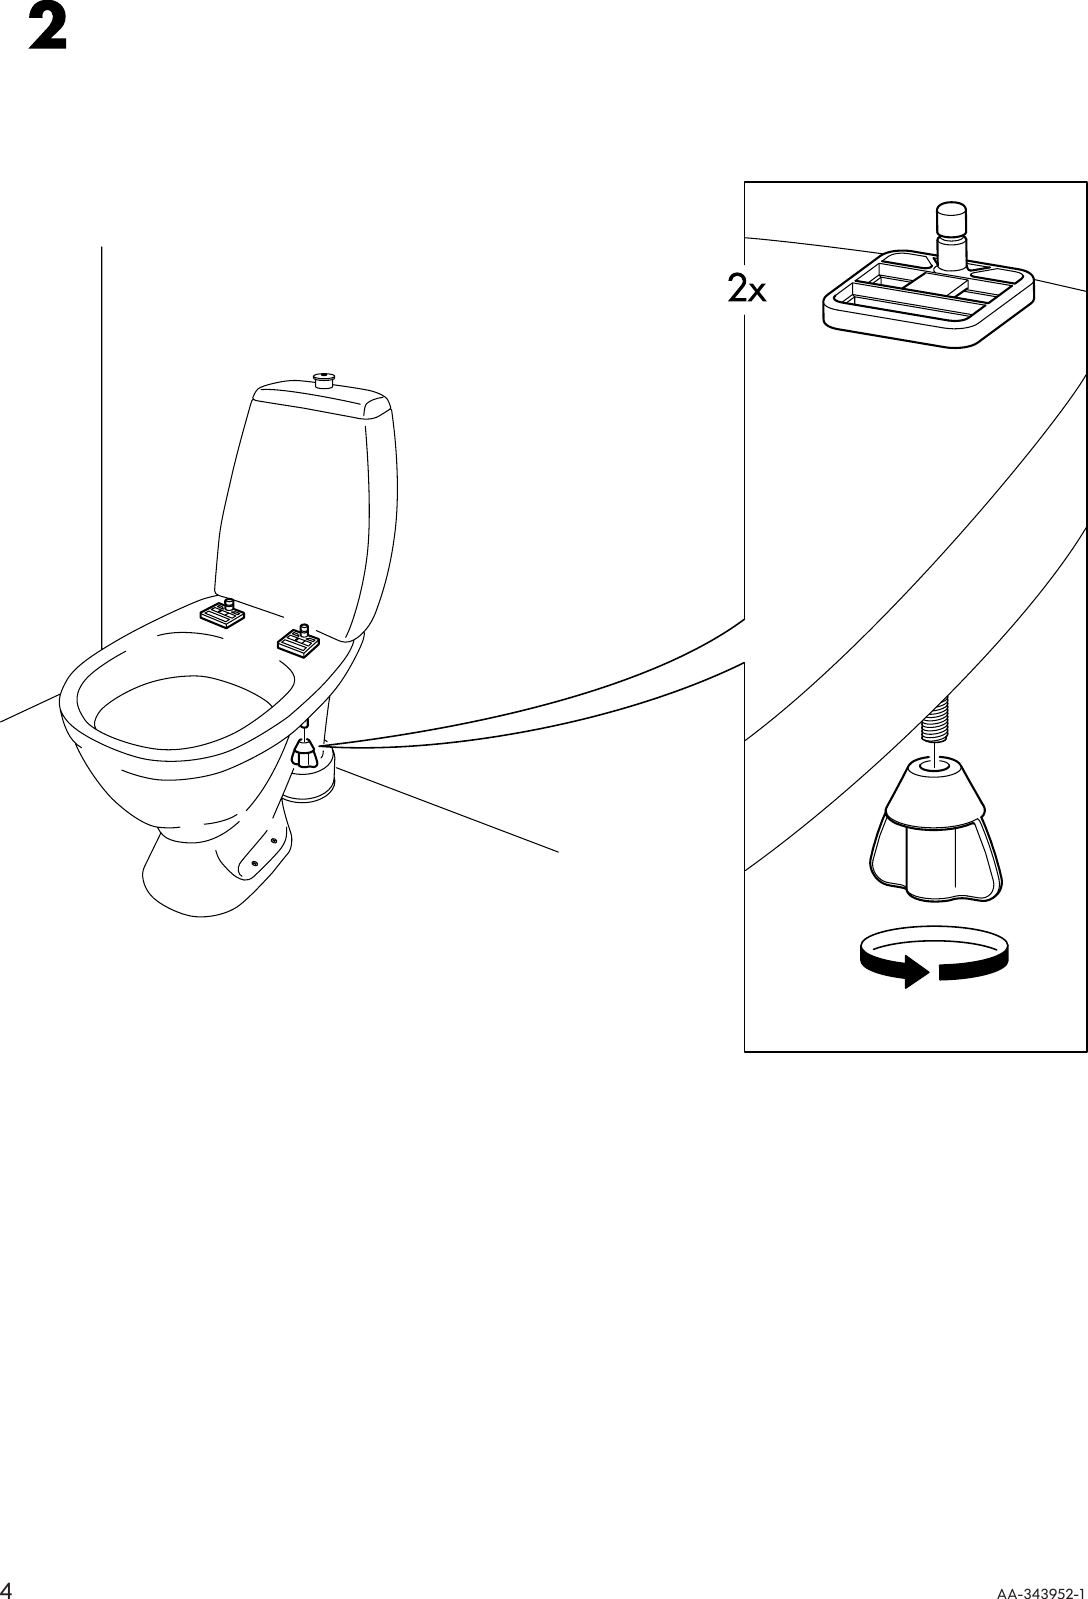 Page 4 of 8 - Ikea Ikea-Freden-Toilet-Seat-Assembly-Instruction